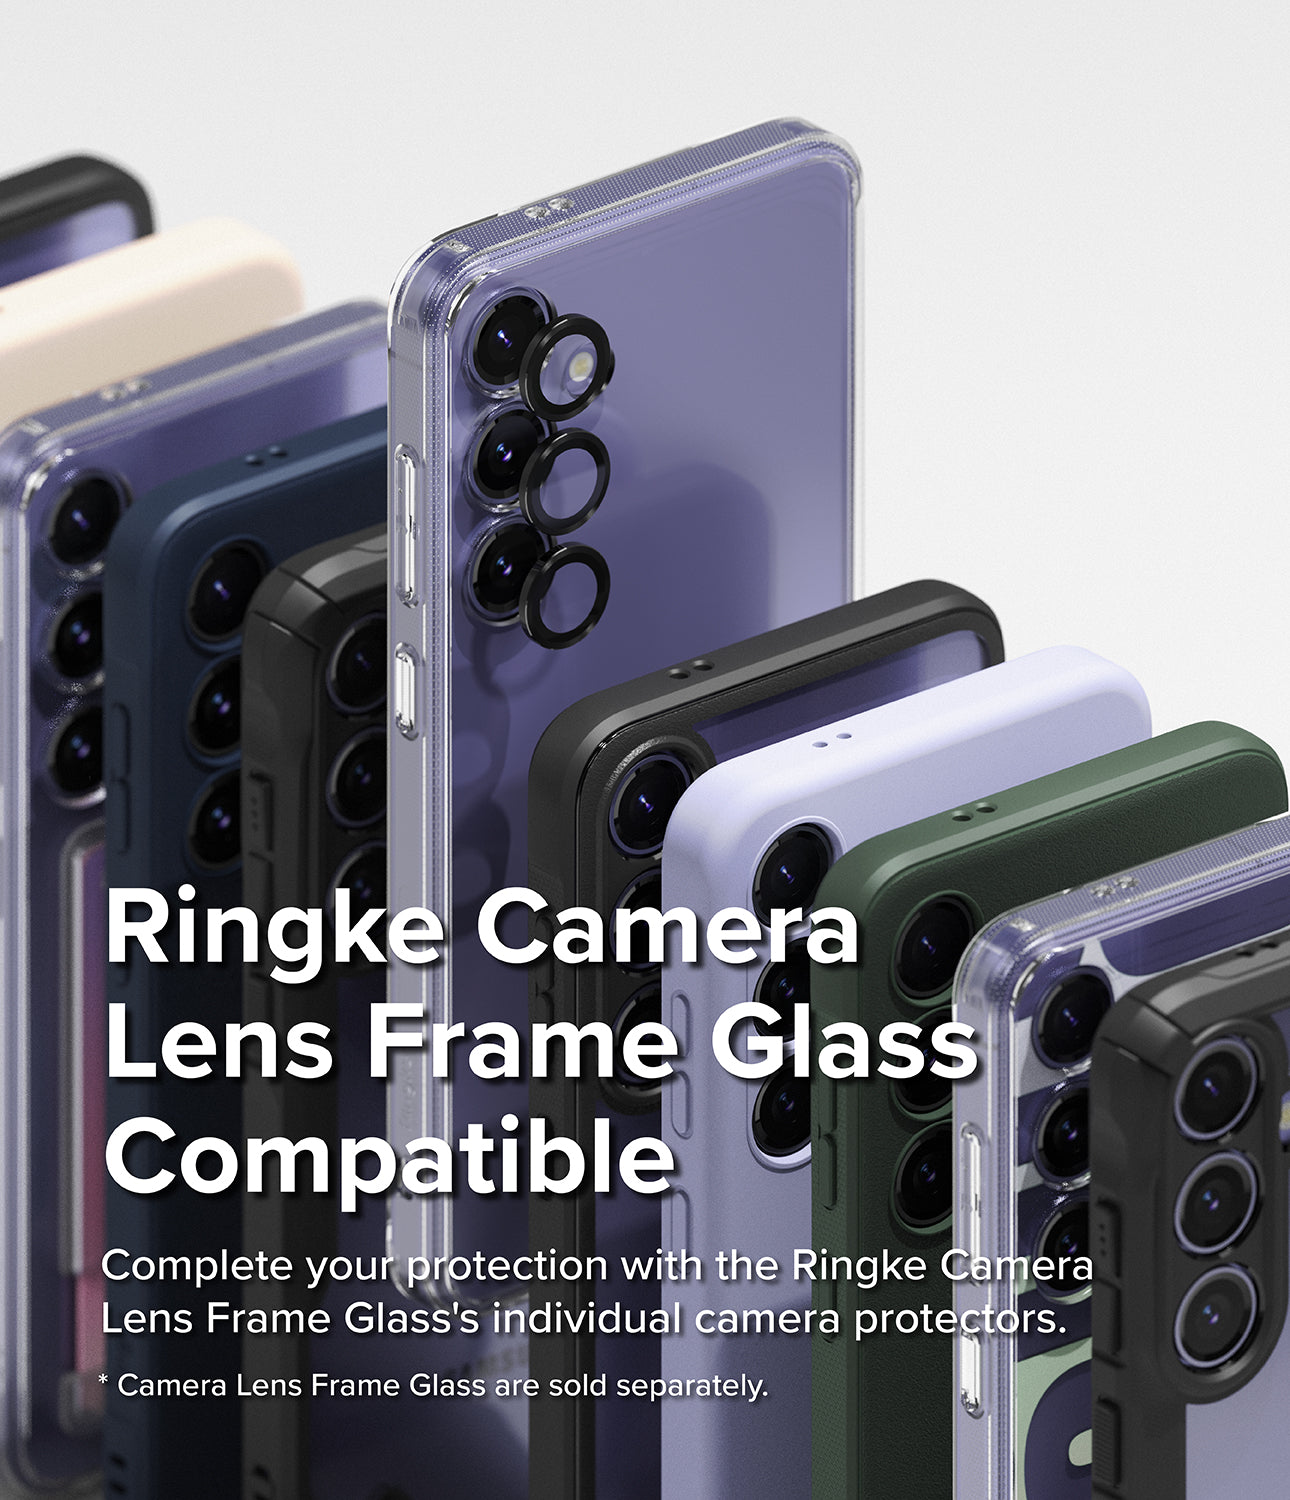 Galaxy S24 Plus Case | Fusion Card - Ringke Camera Lens Frame Glass Compatible. Complete your protection with the Ringke Camera Lens Frame Glass' individual camera protectors.